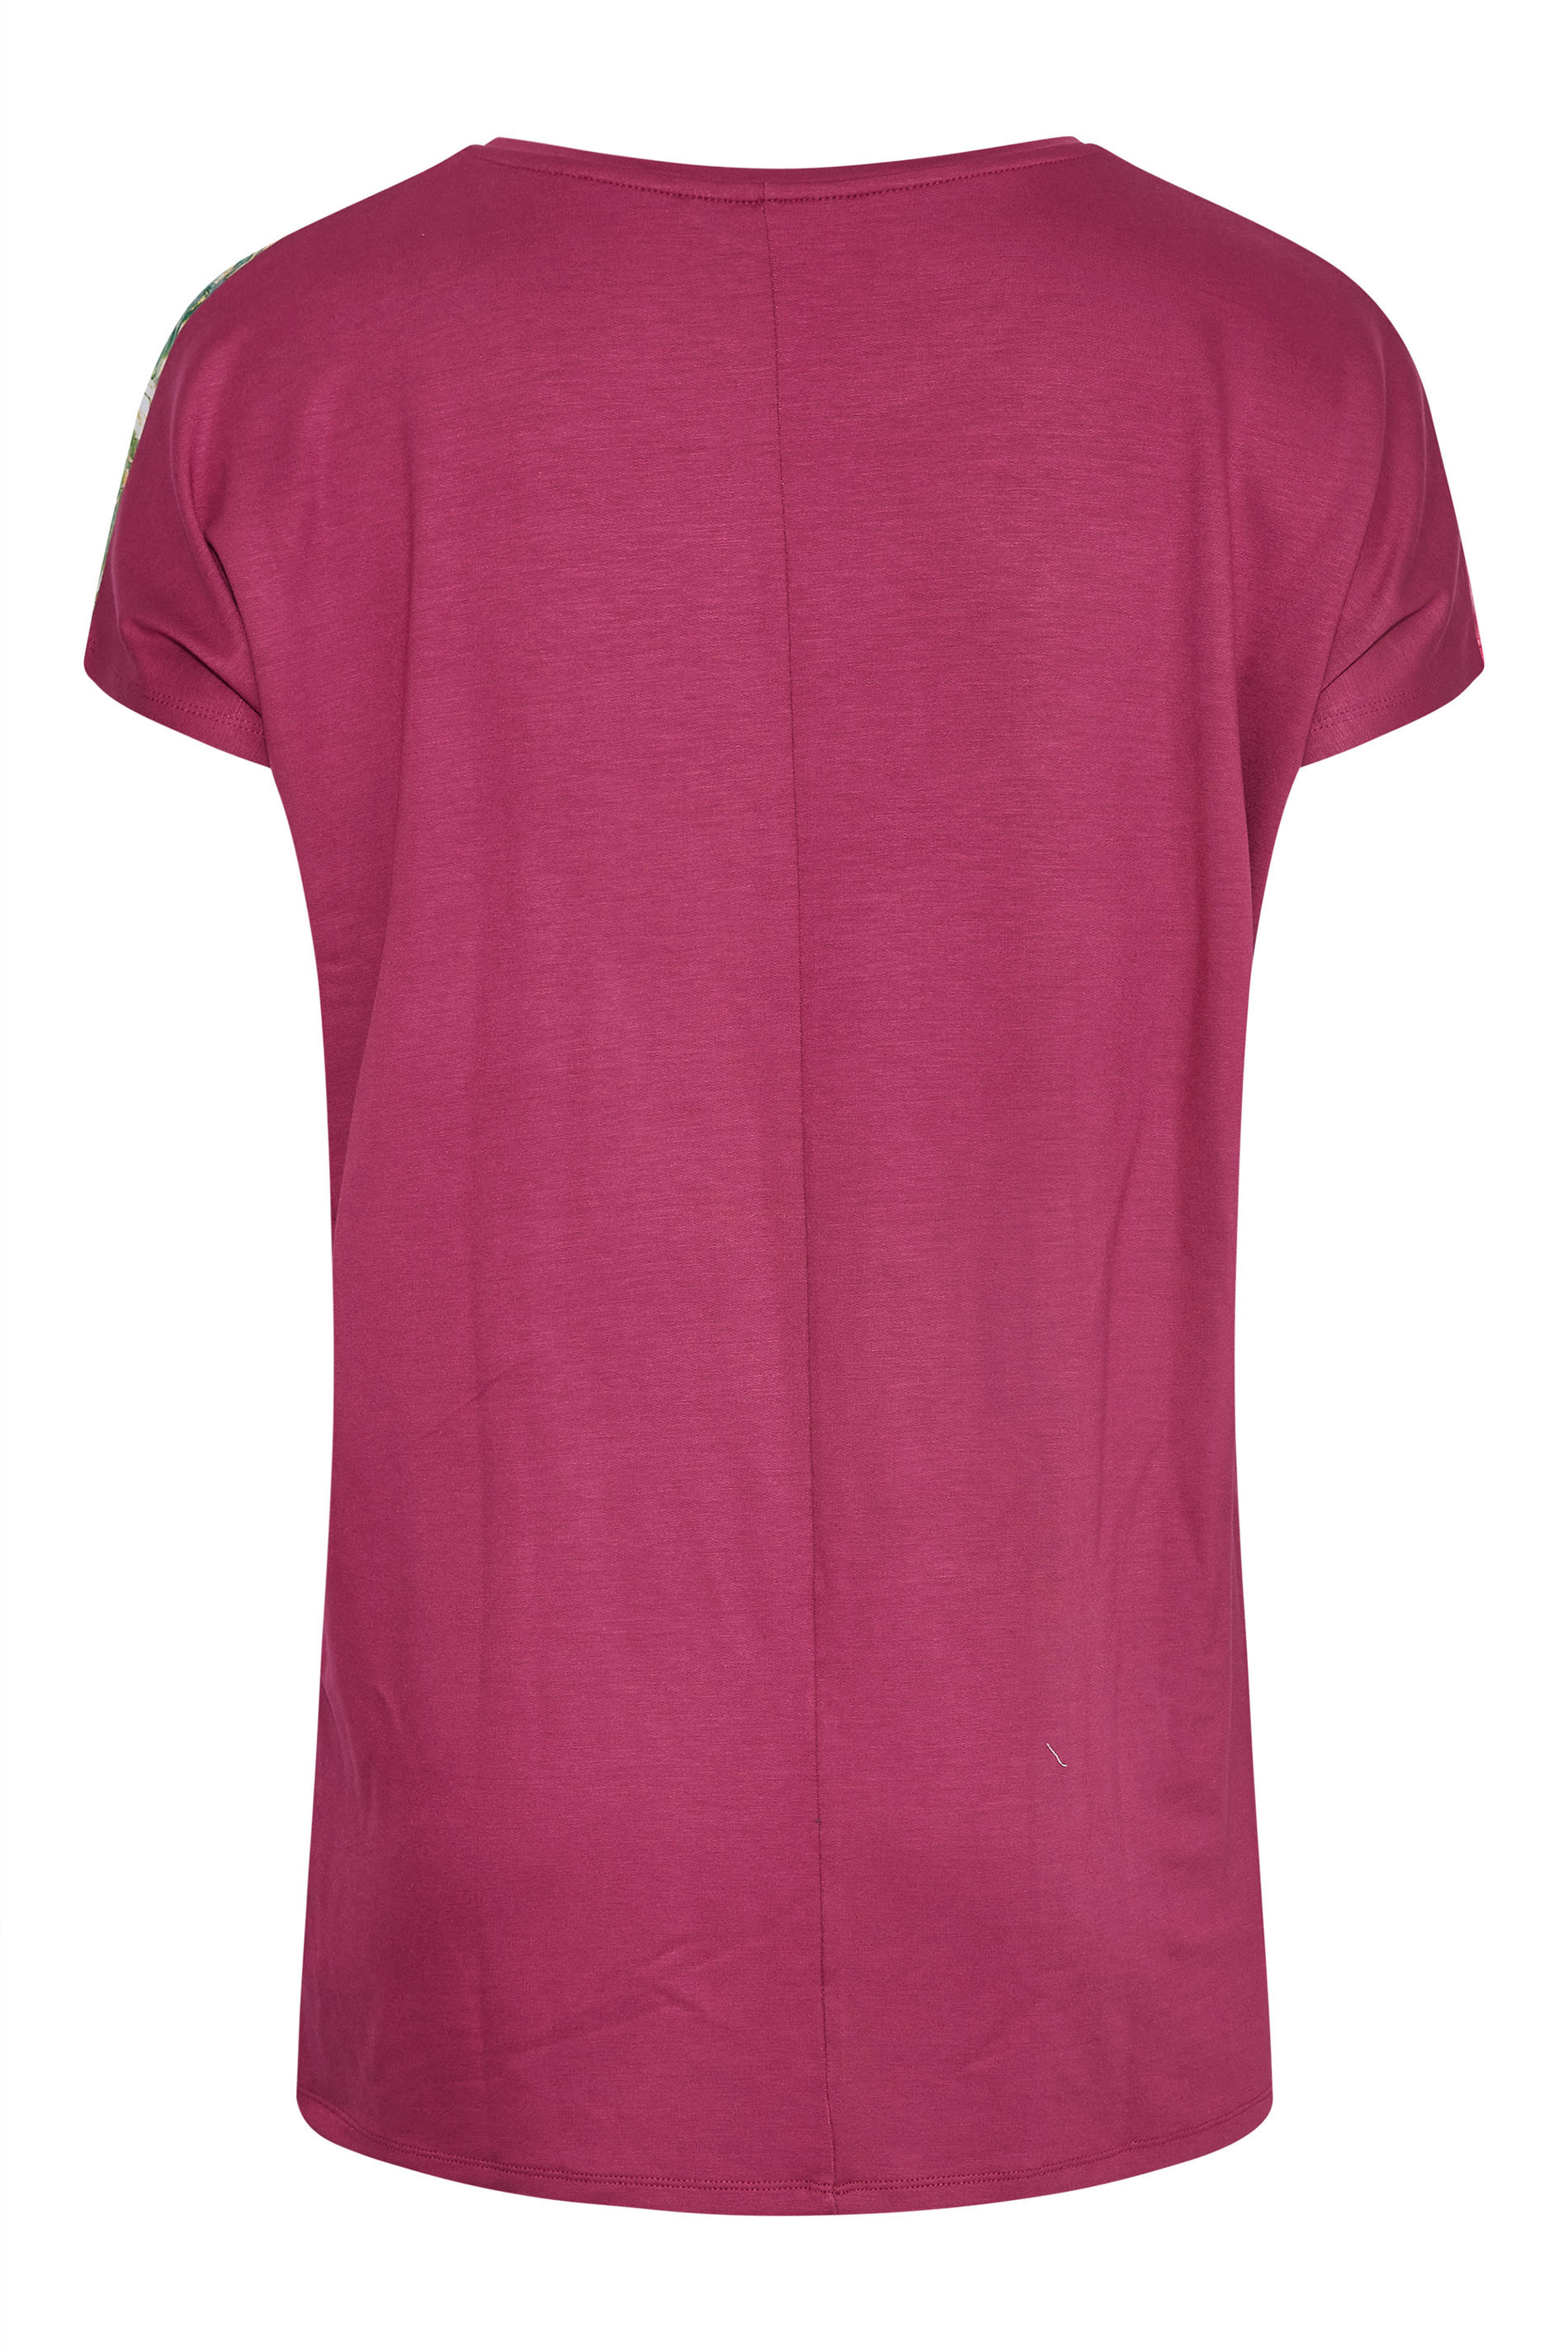 Grande taille  Tops Grande taille  Tops Jersey | T-Shirt Rose & Vert Tropical - XW76878